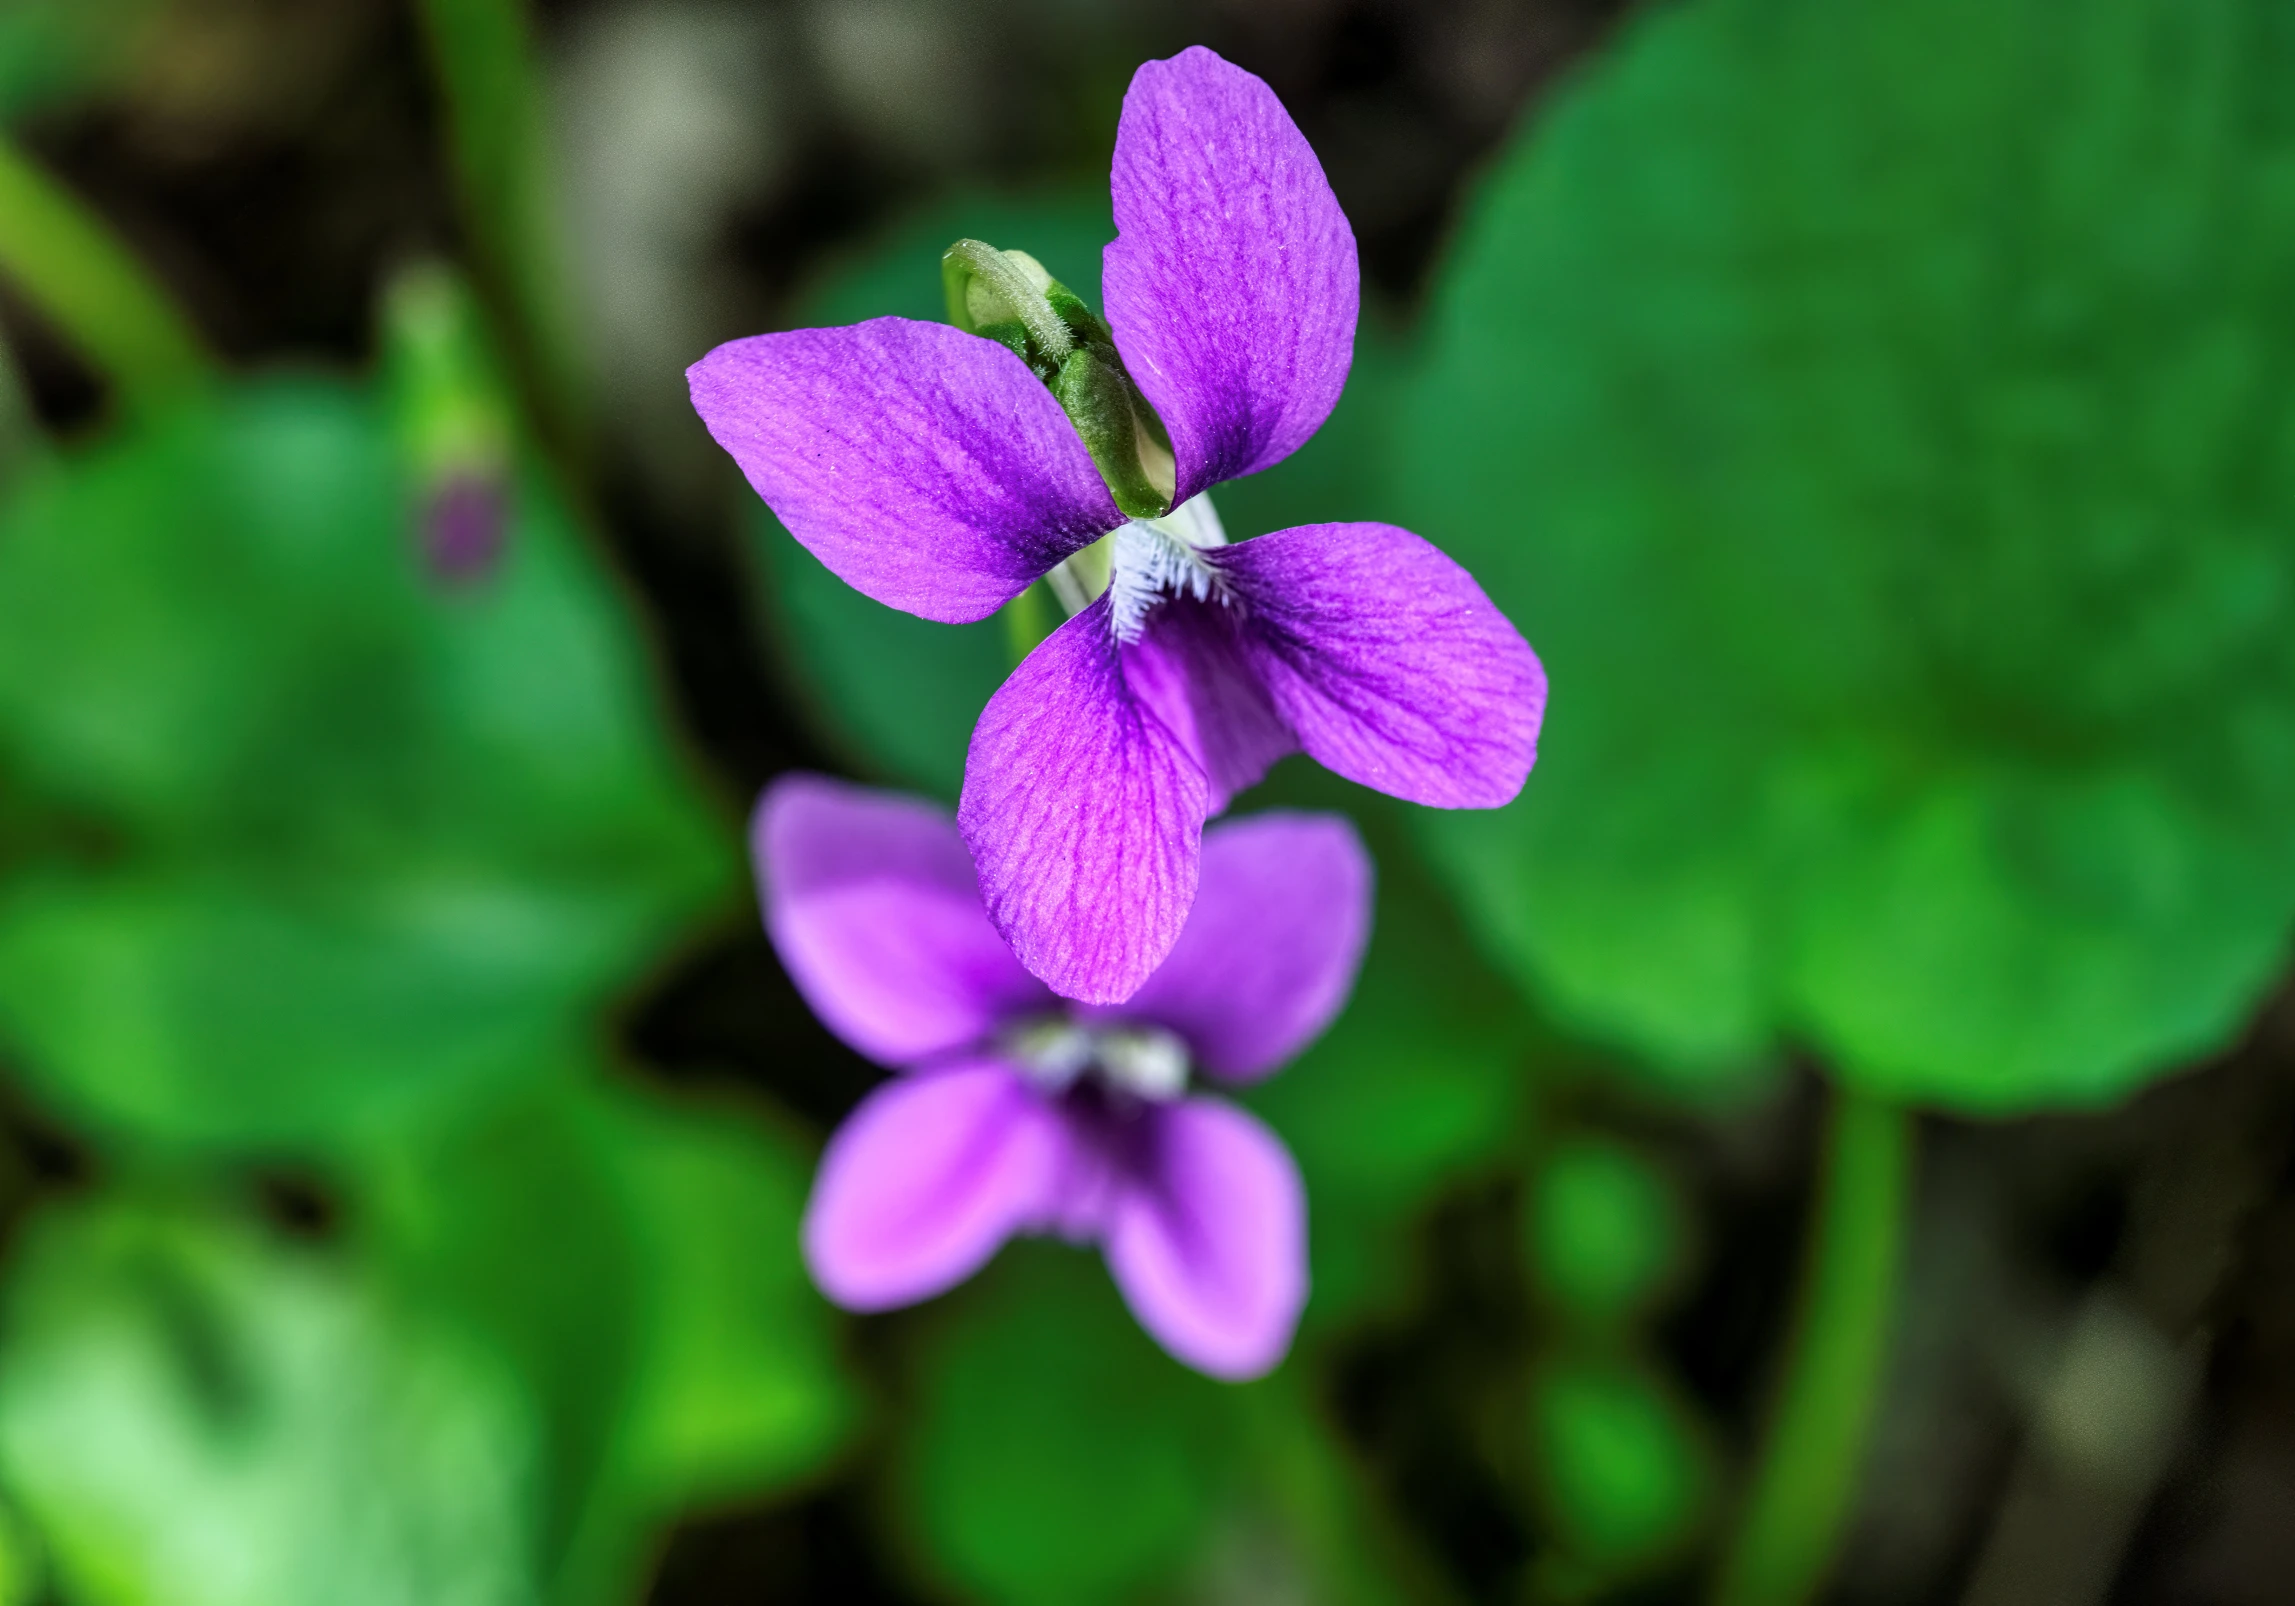 there is a small purple flower next to green leaves